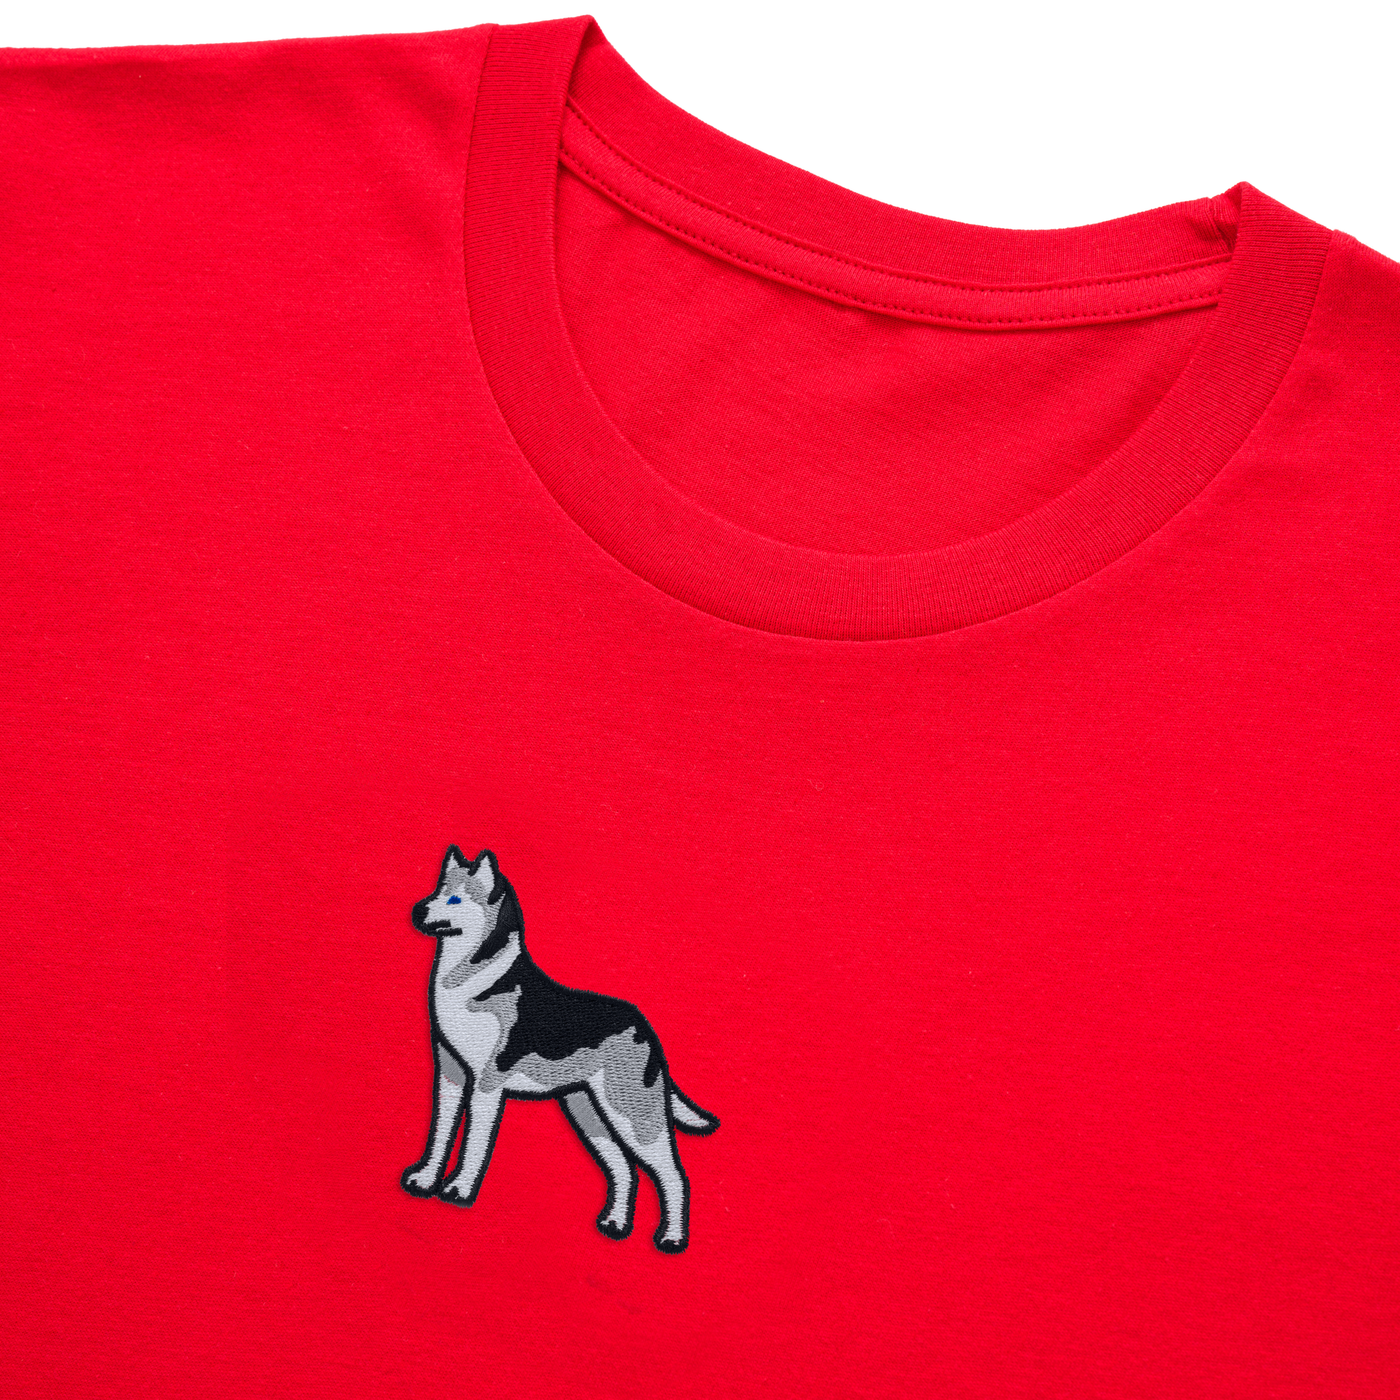 Bobby's Planet Kids Embroidered Siberian Husky T-Shirt from Paws Dog Cat Animals Collection in Red Color#color_red